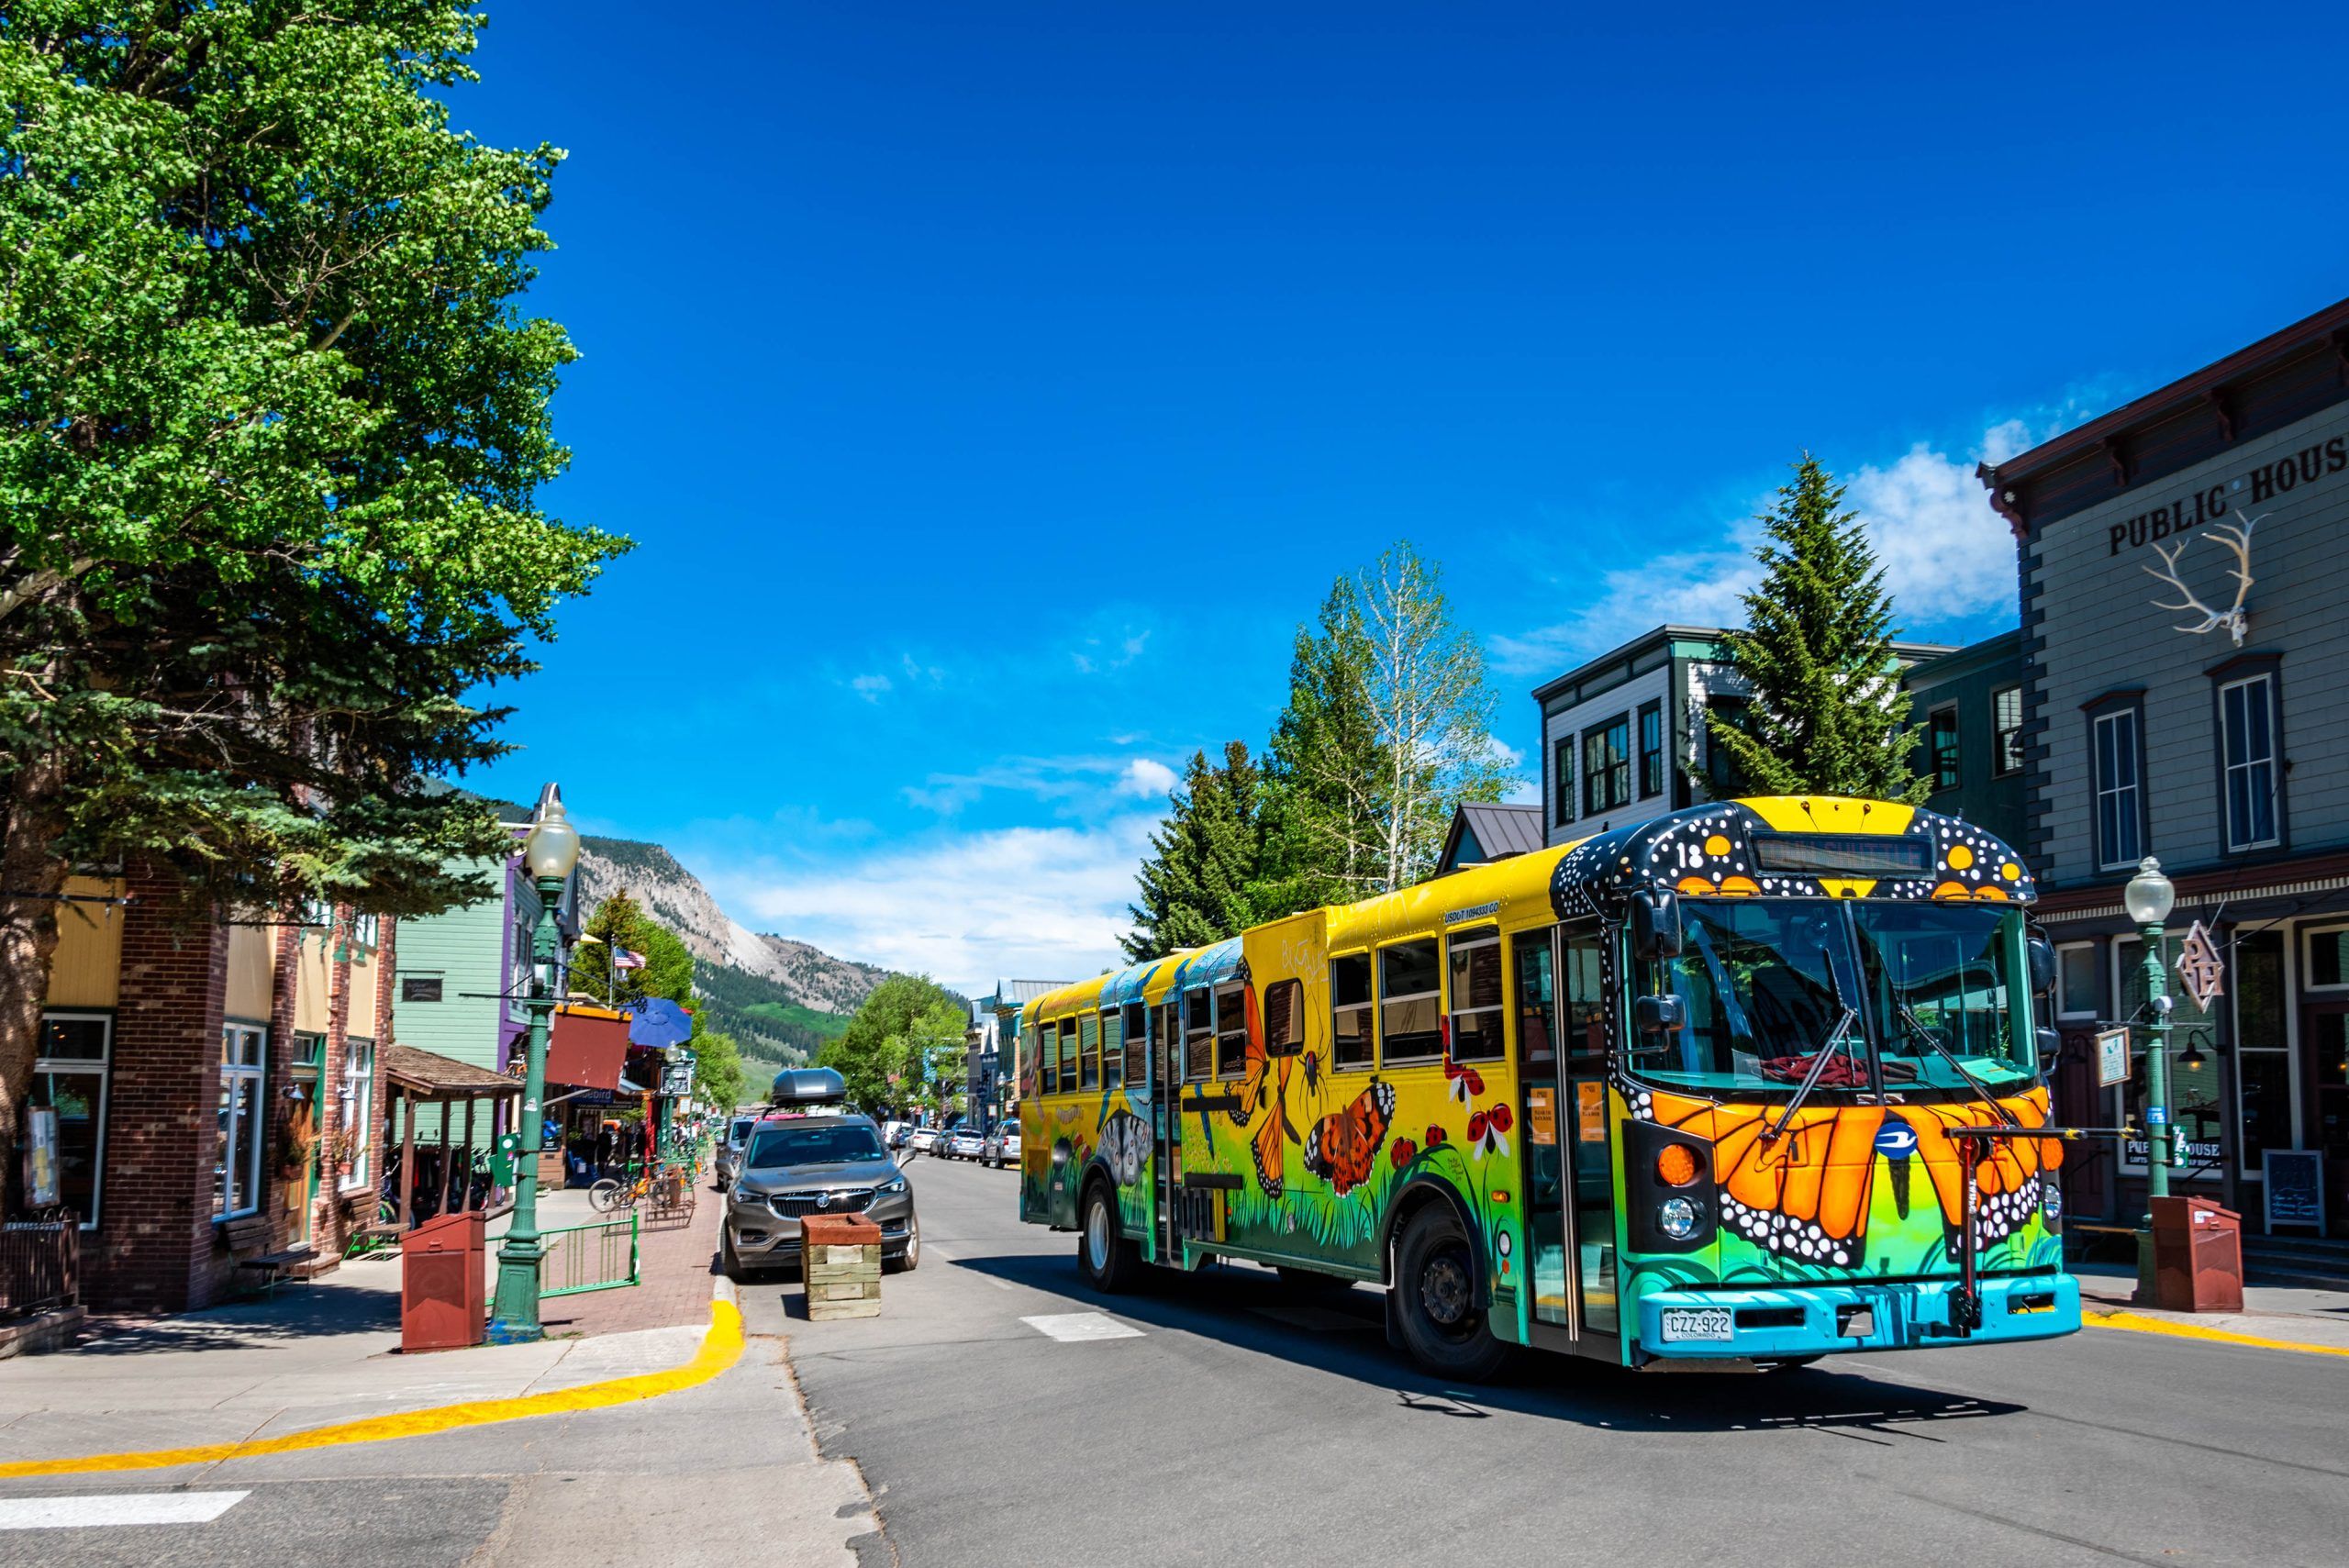 Downtown Crested Butte, Colorado in summer